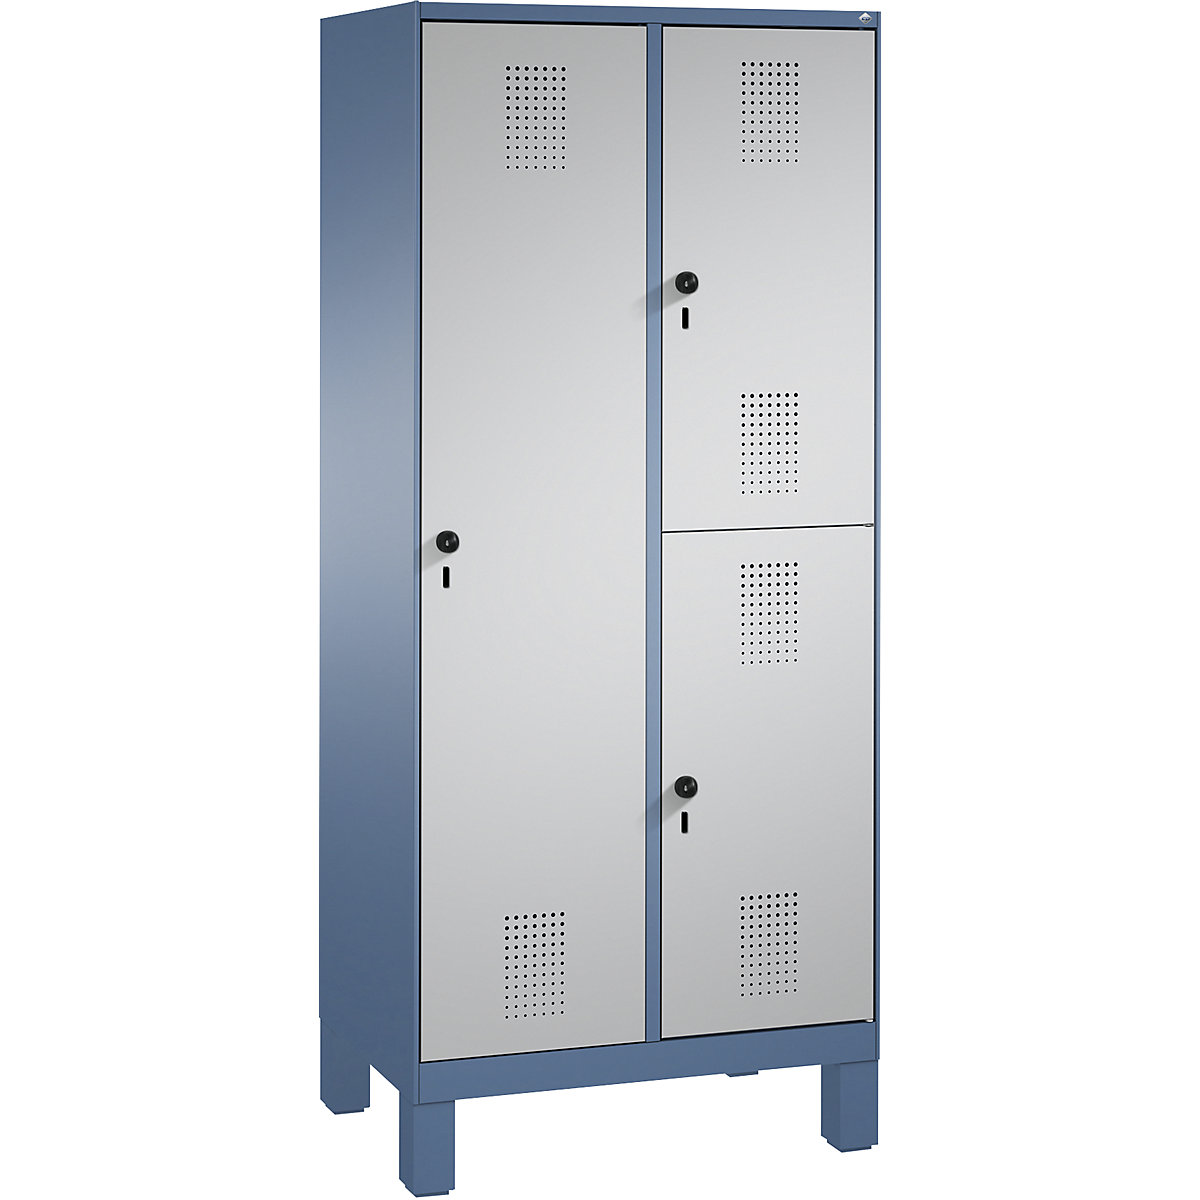 EVOLO combination cupboard, single and double tier – C+P, 2 compartments, 3 doors, compartment width 400 mm, with feet, distant blue / white aluminium